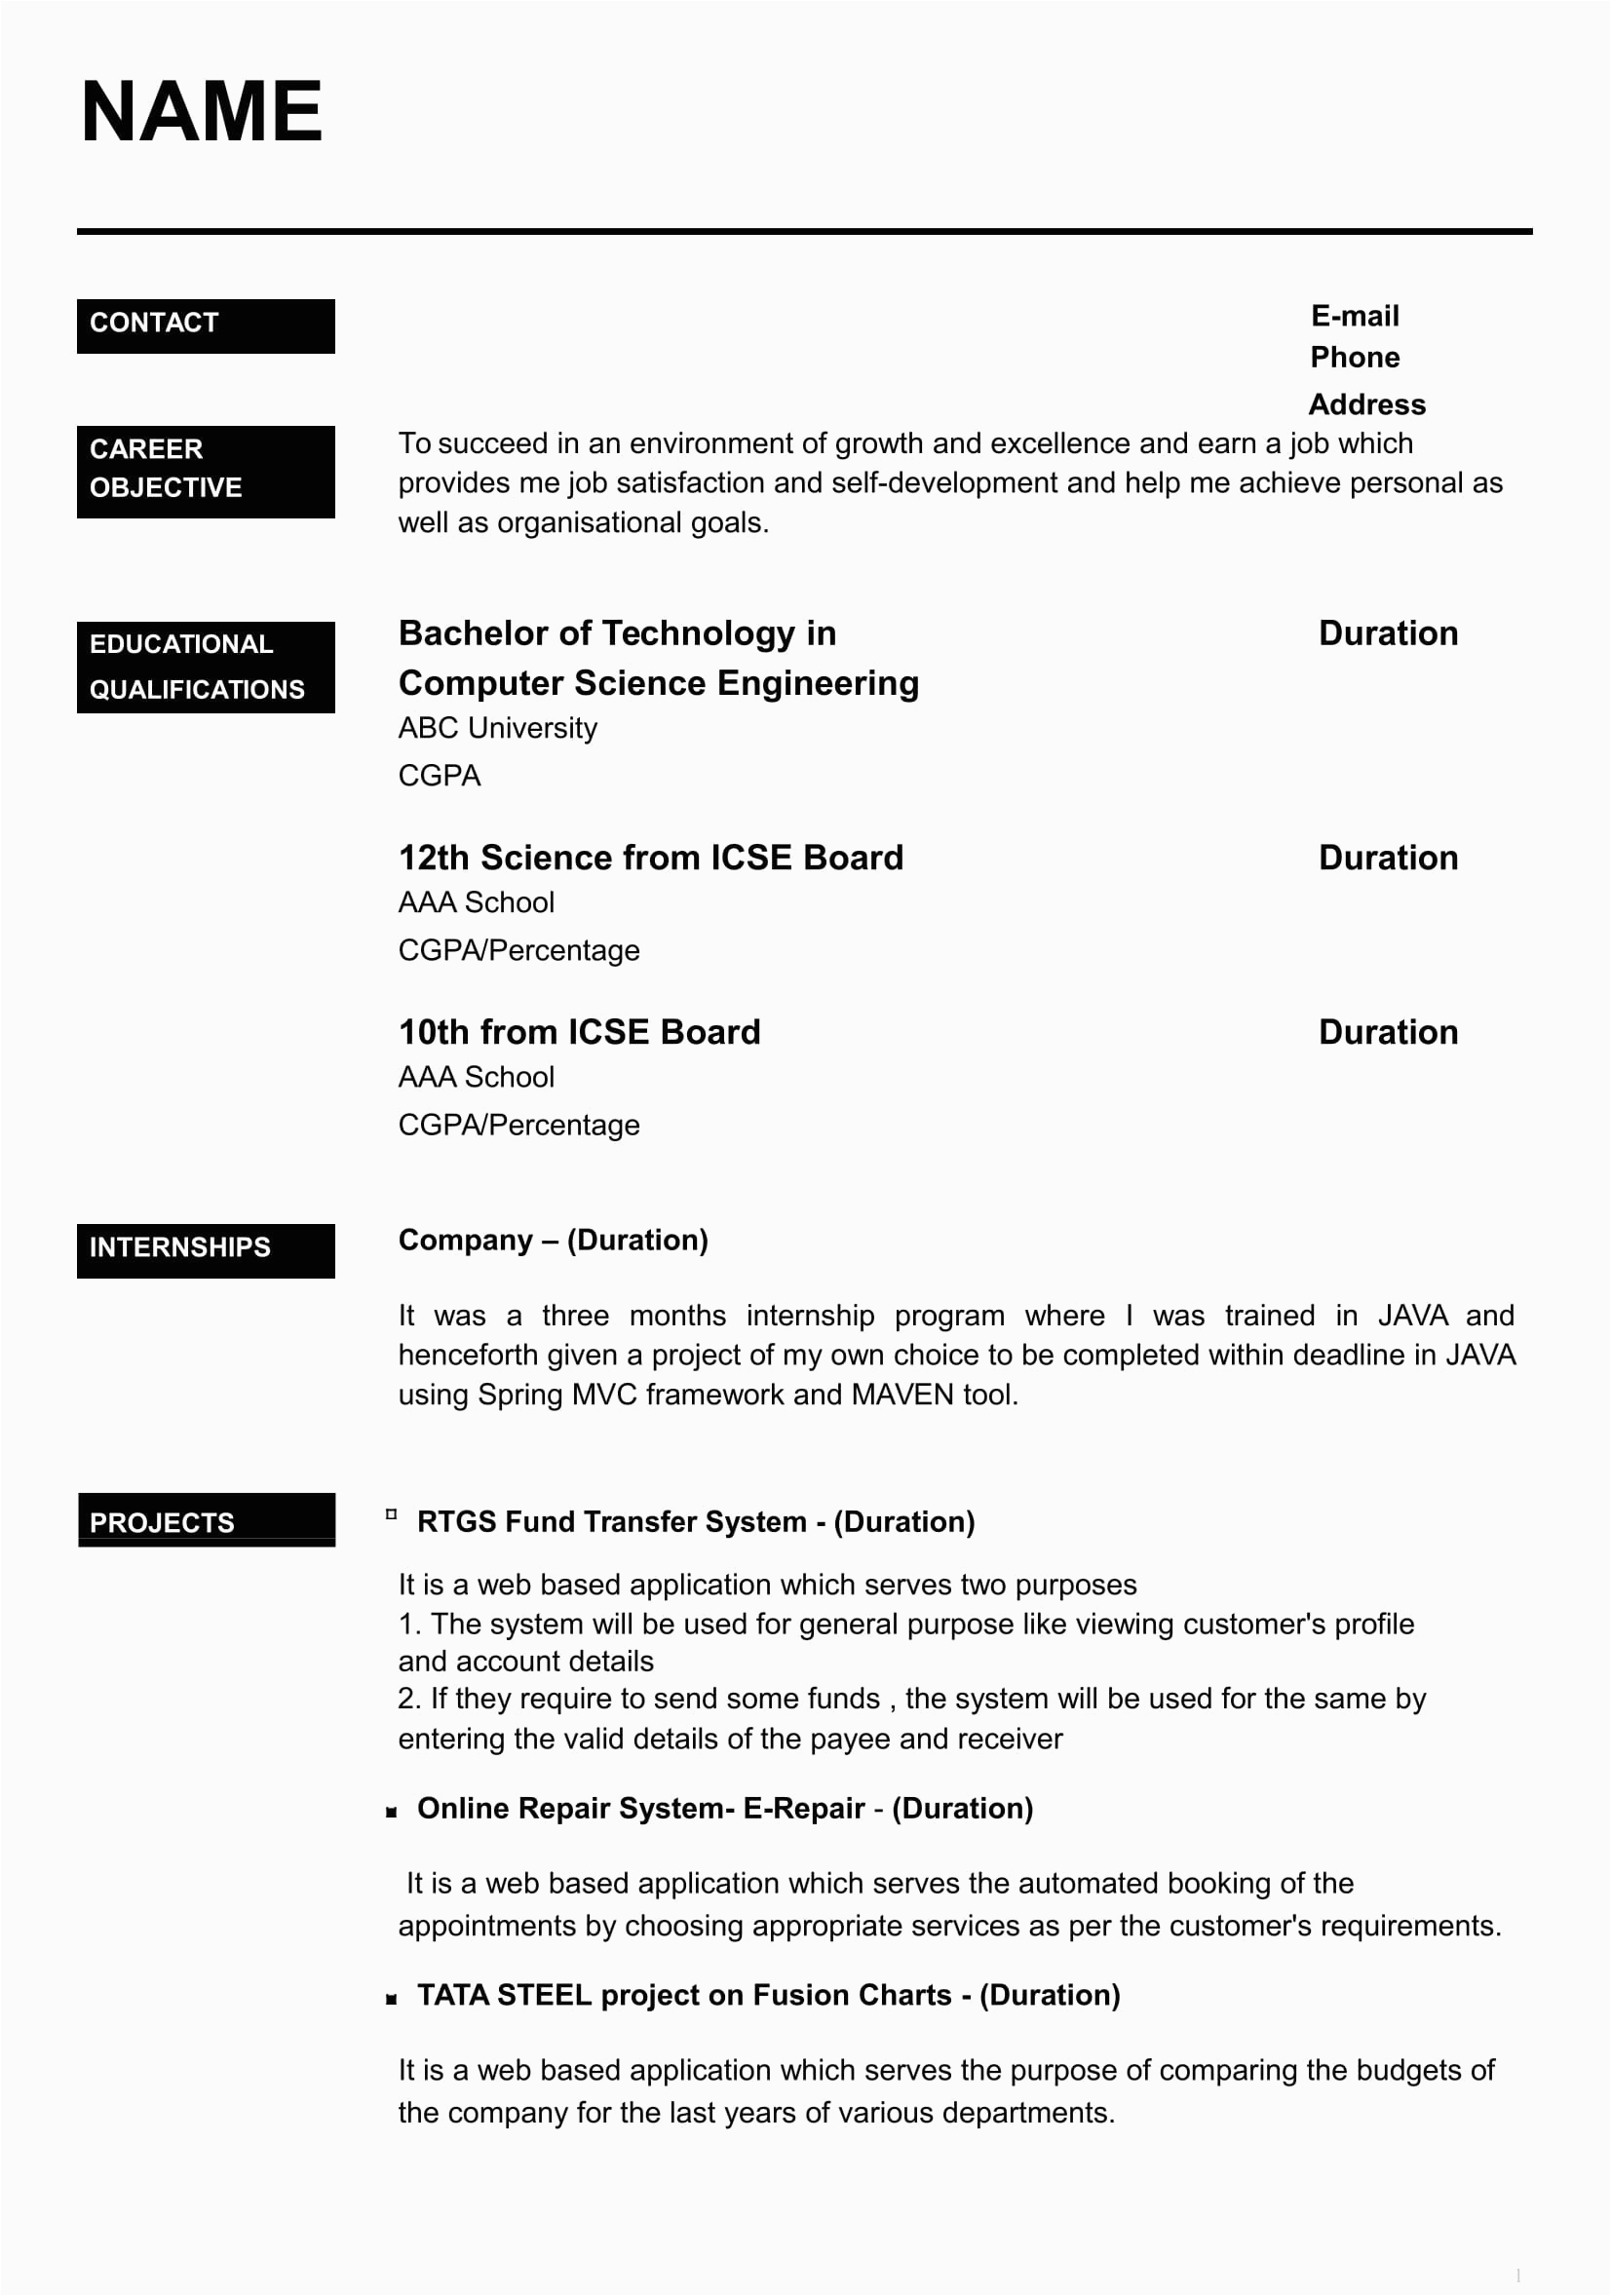 Free Resume Templates for Freshers Free Download Resume formats for 2020